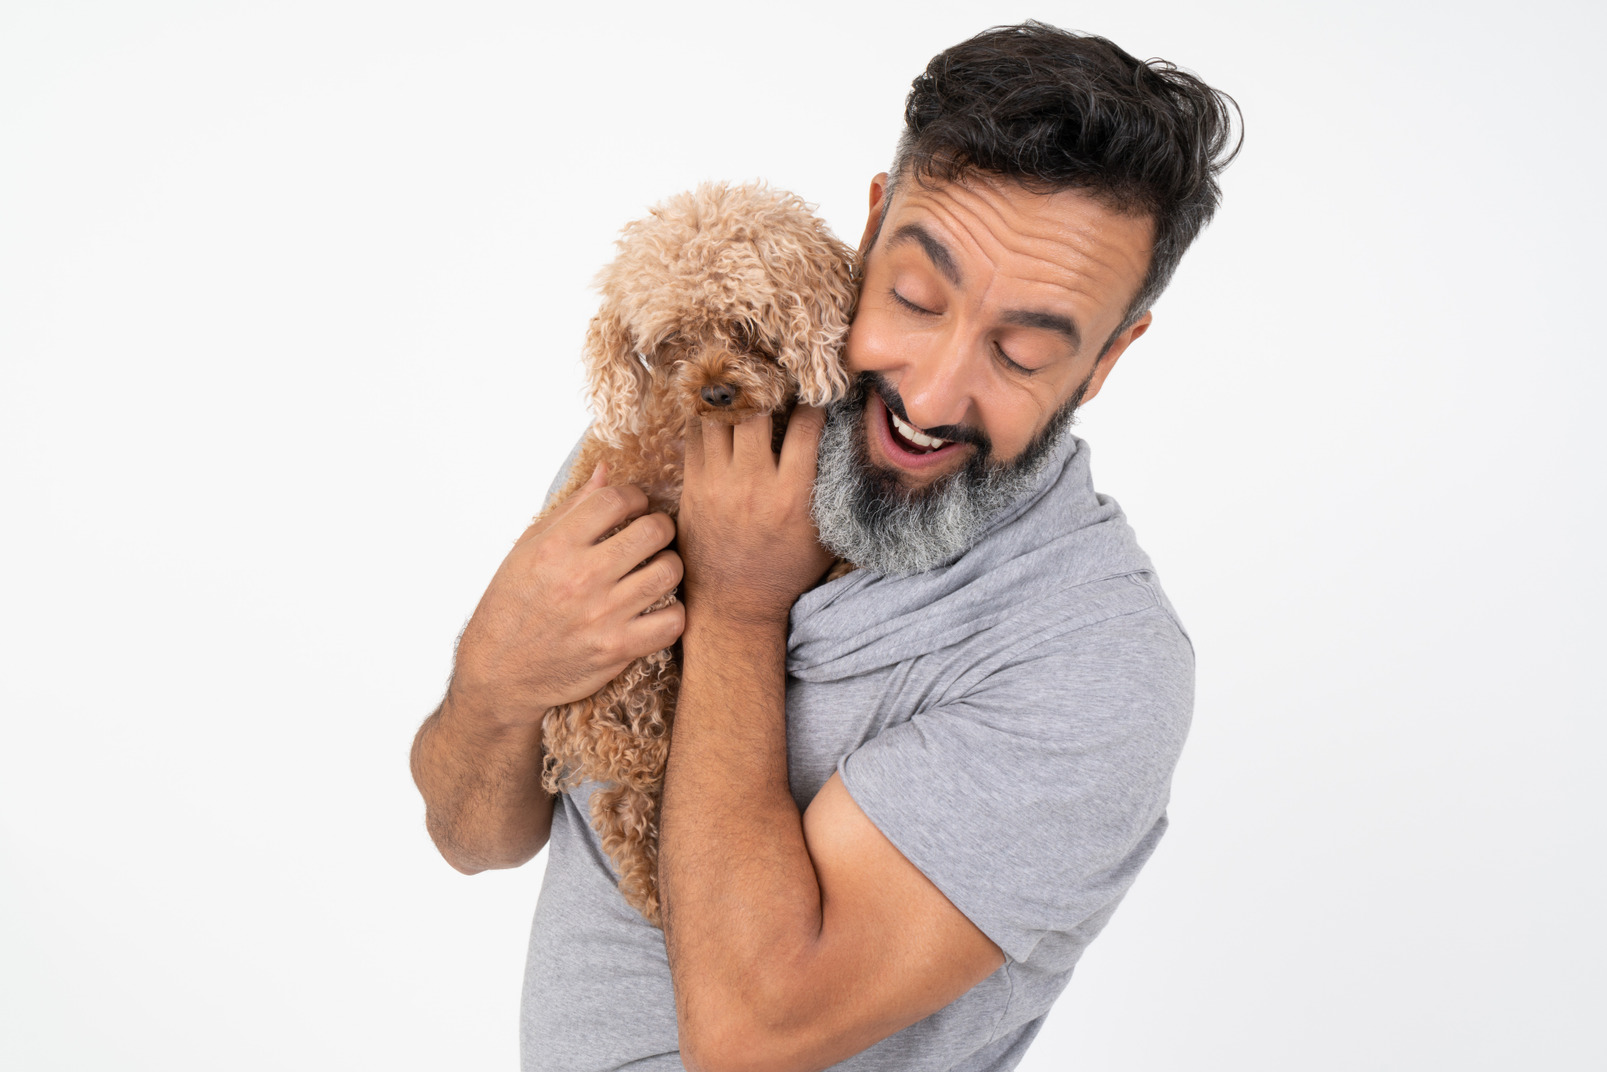 Contented mature man holding a puppy